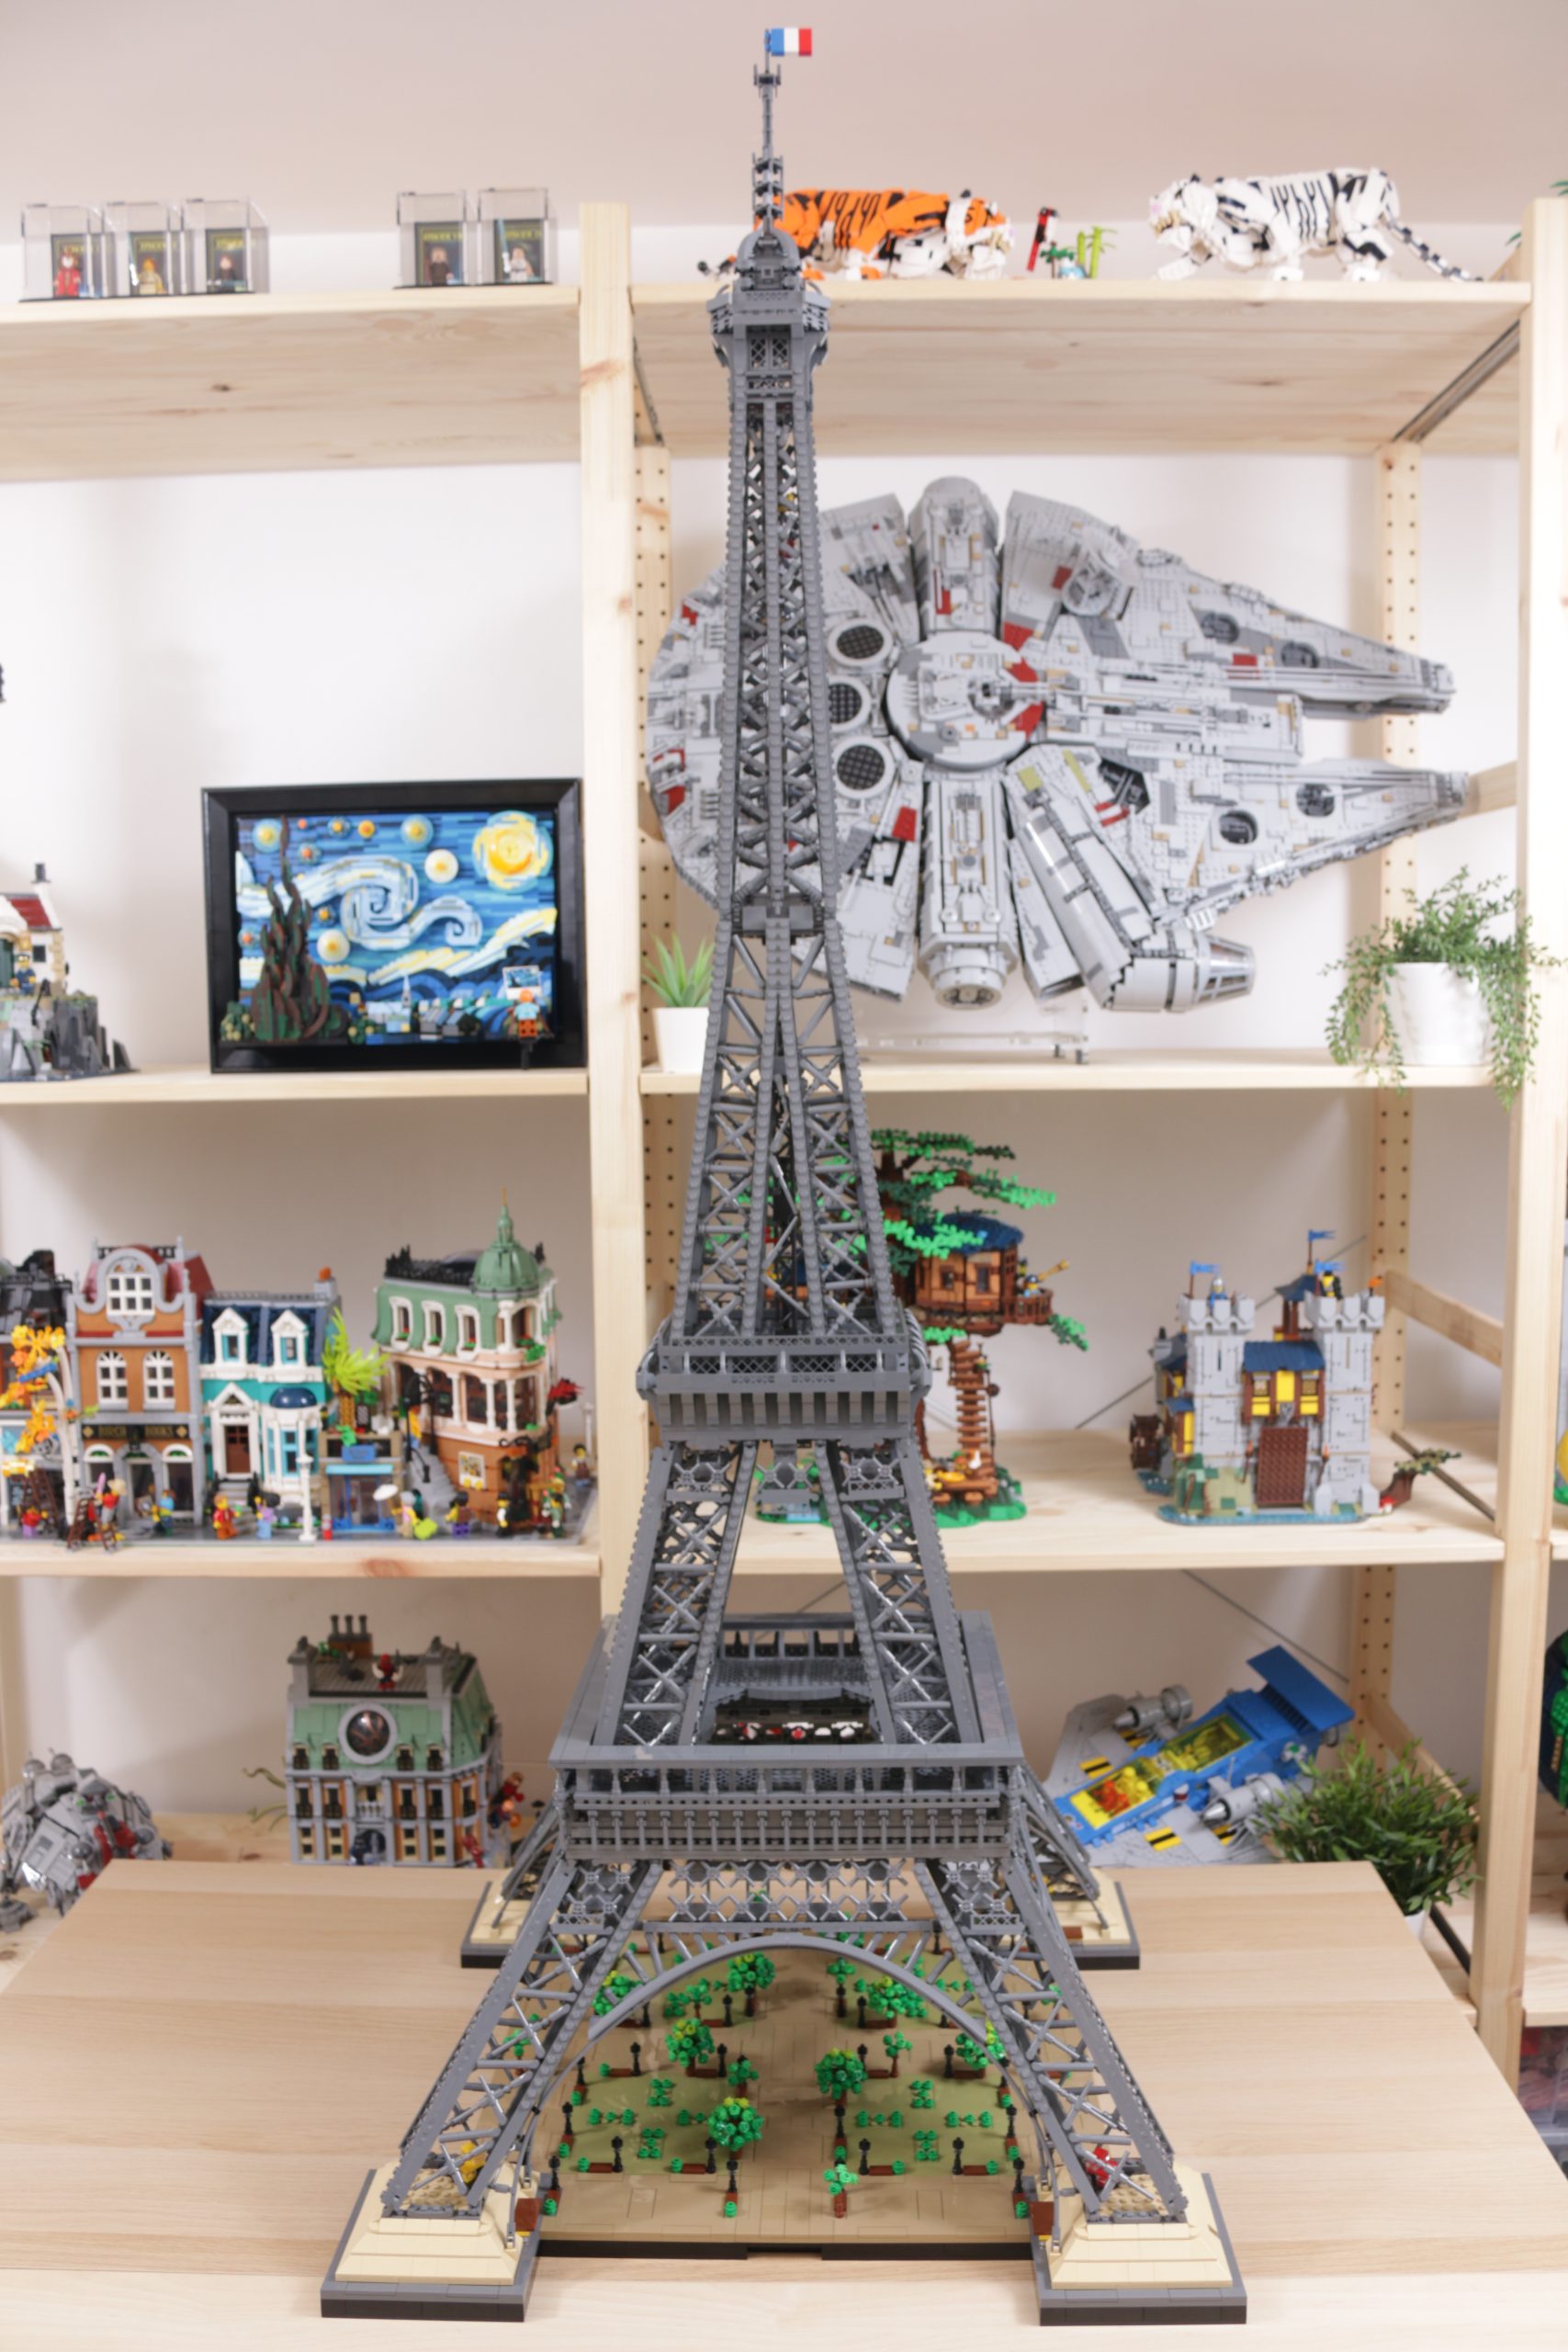 LEGO 10307 Eiffel Tower review